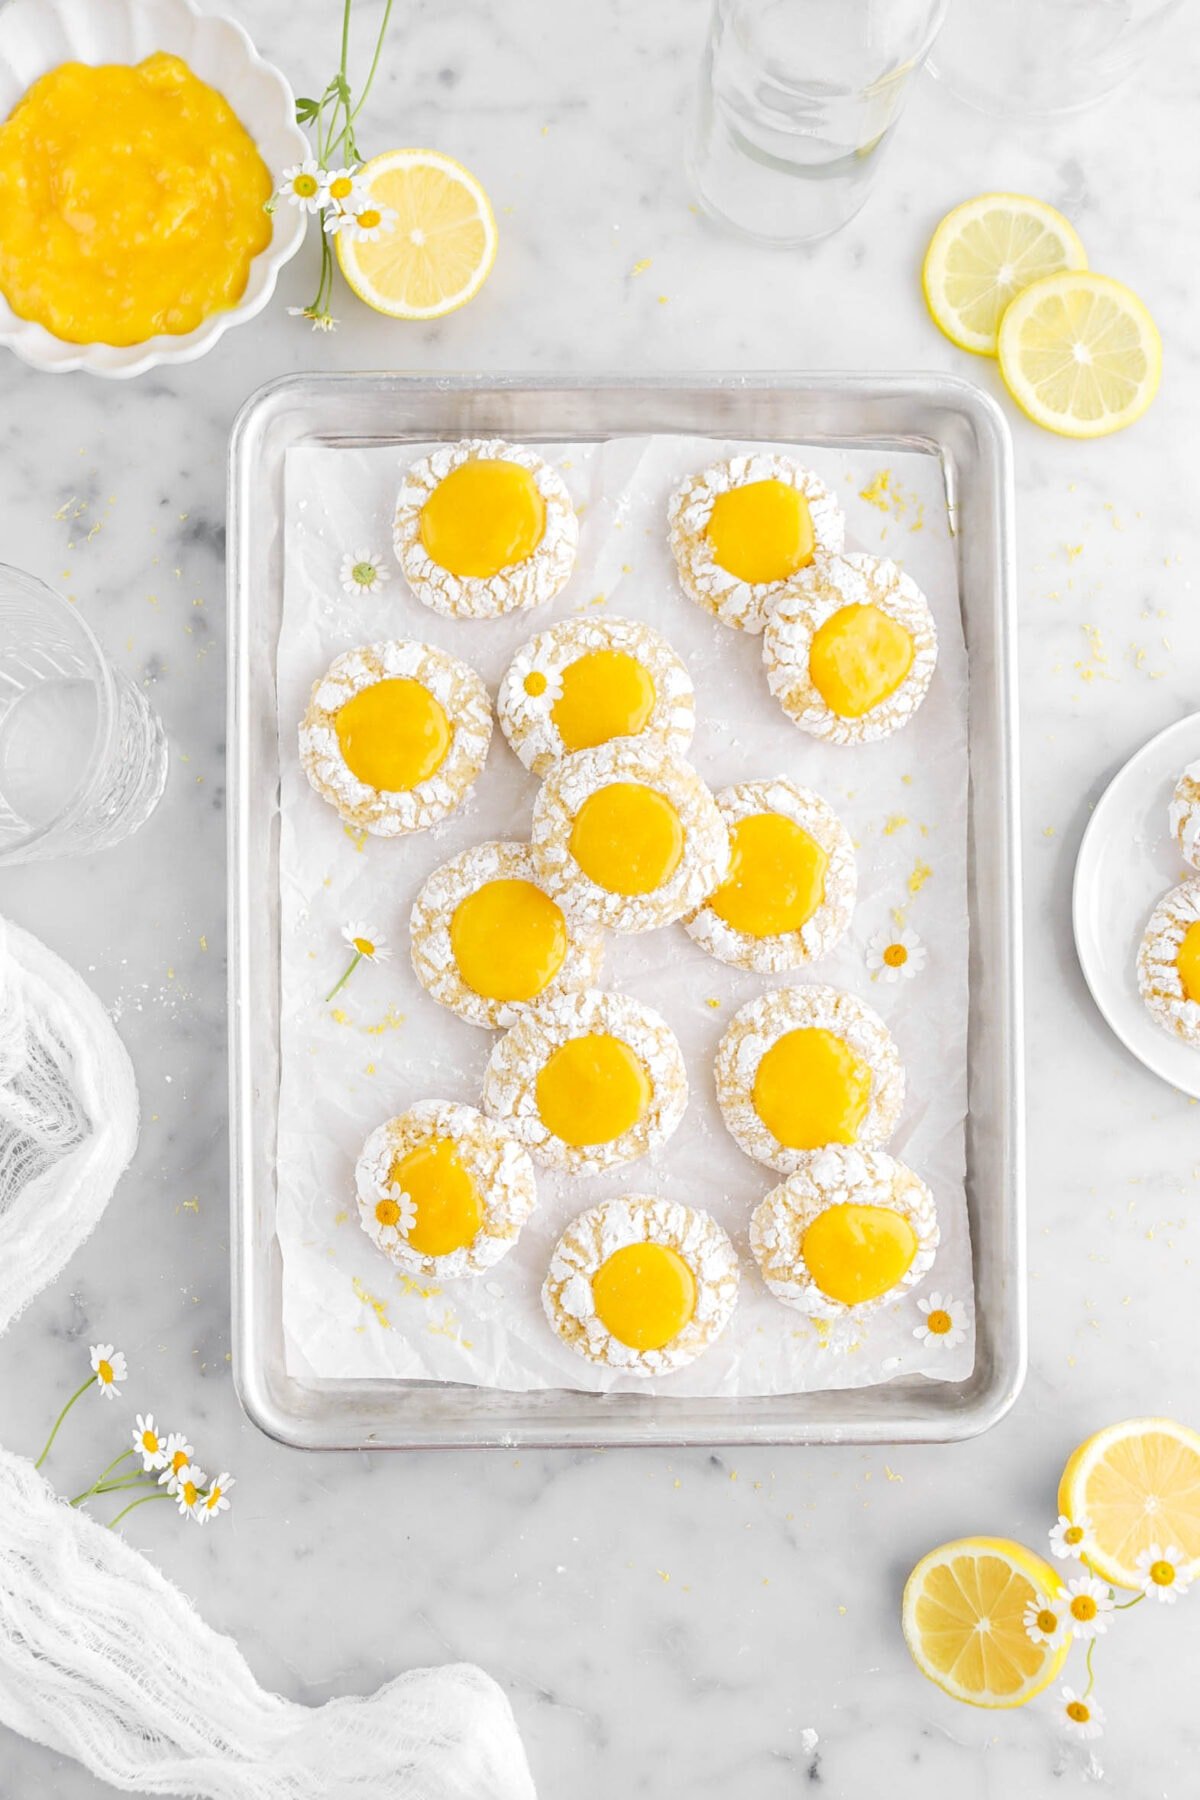 thirteen lemon curd thumbprint cookies on small lined sheet pan with chamomile flowers on some cookies, with lemon halves, a bowl of lemon curd, an empty glass, and more chamomile flowers around on marble surface.